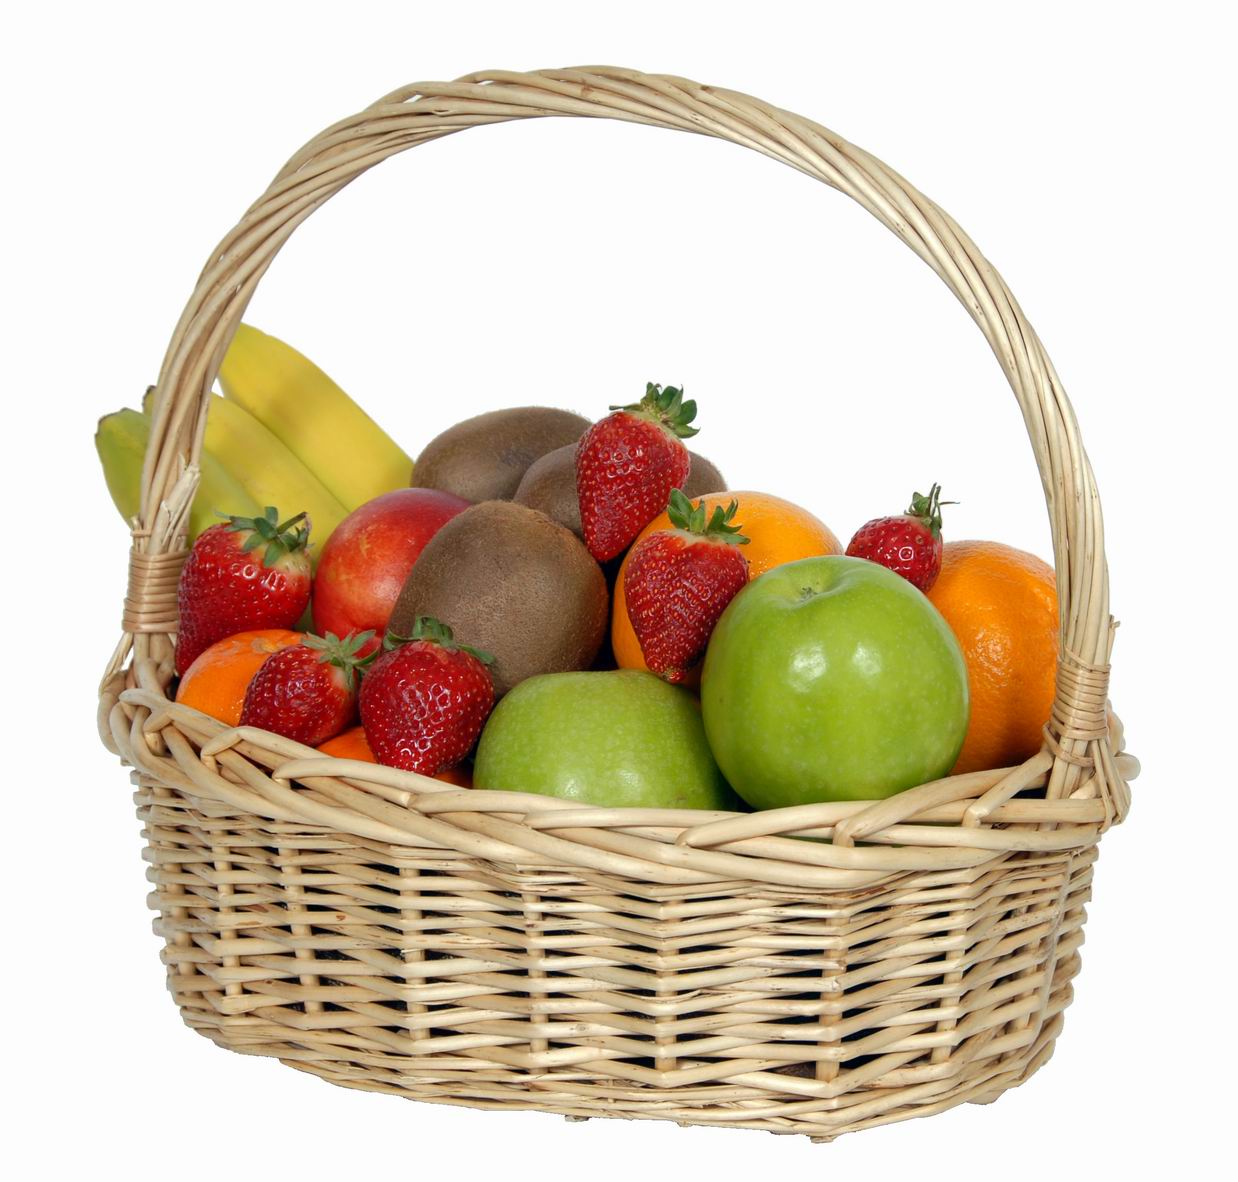 A Basket Of Fruit Wallpapers High Quality | Download Free